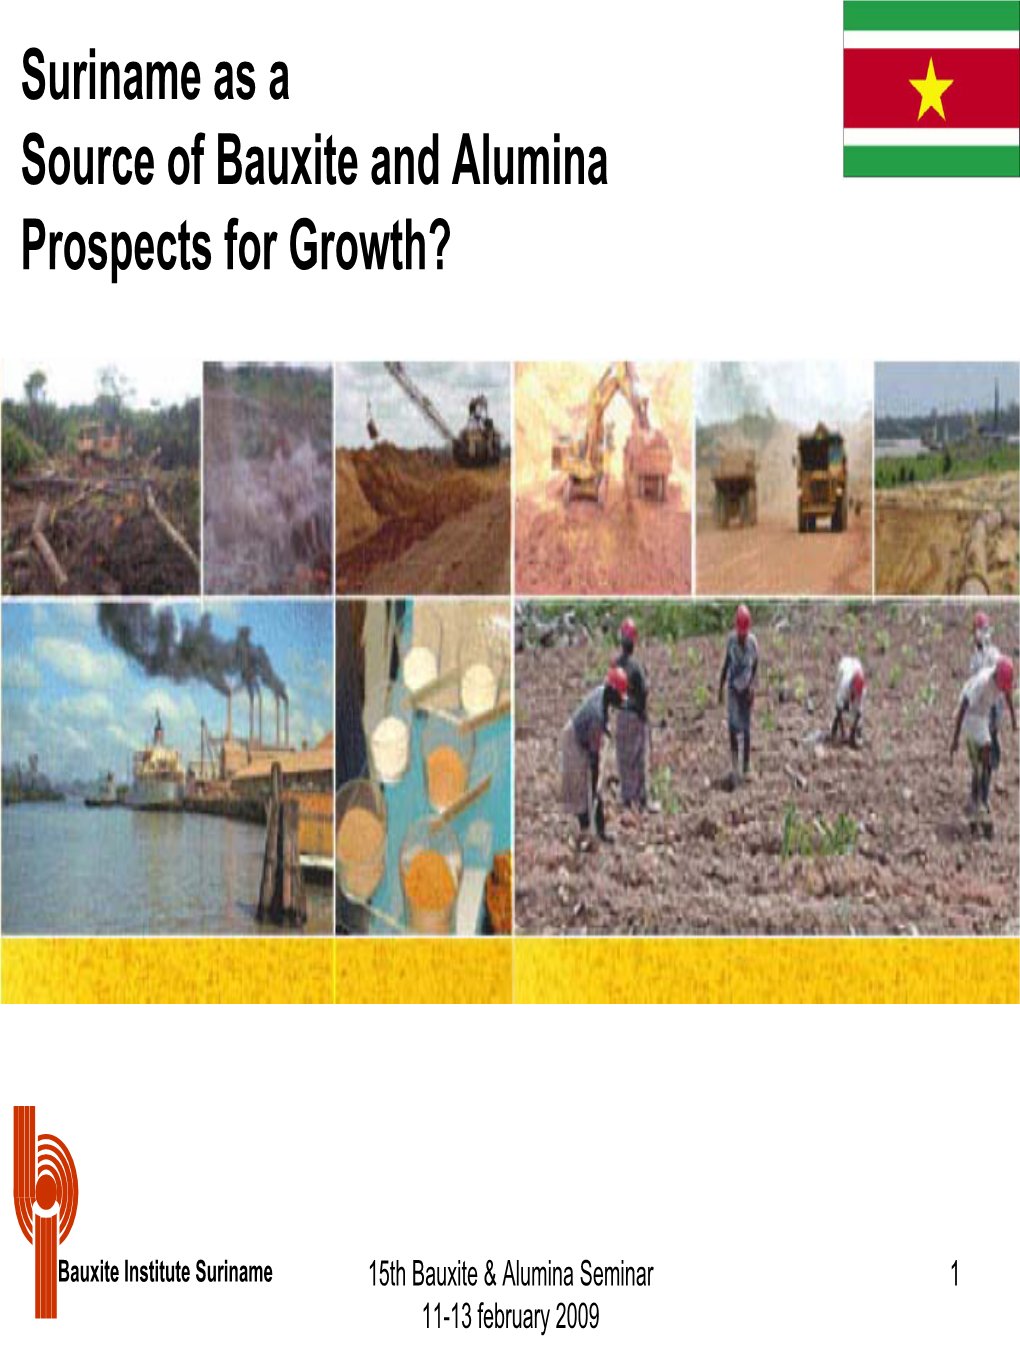 Suriname As a Source of Bauxite and Alumina Prospects for Growth?